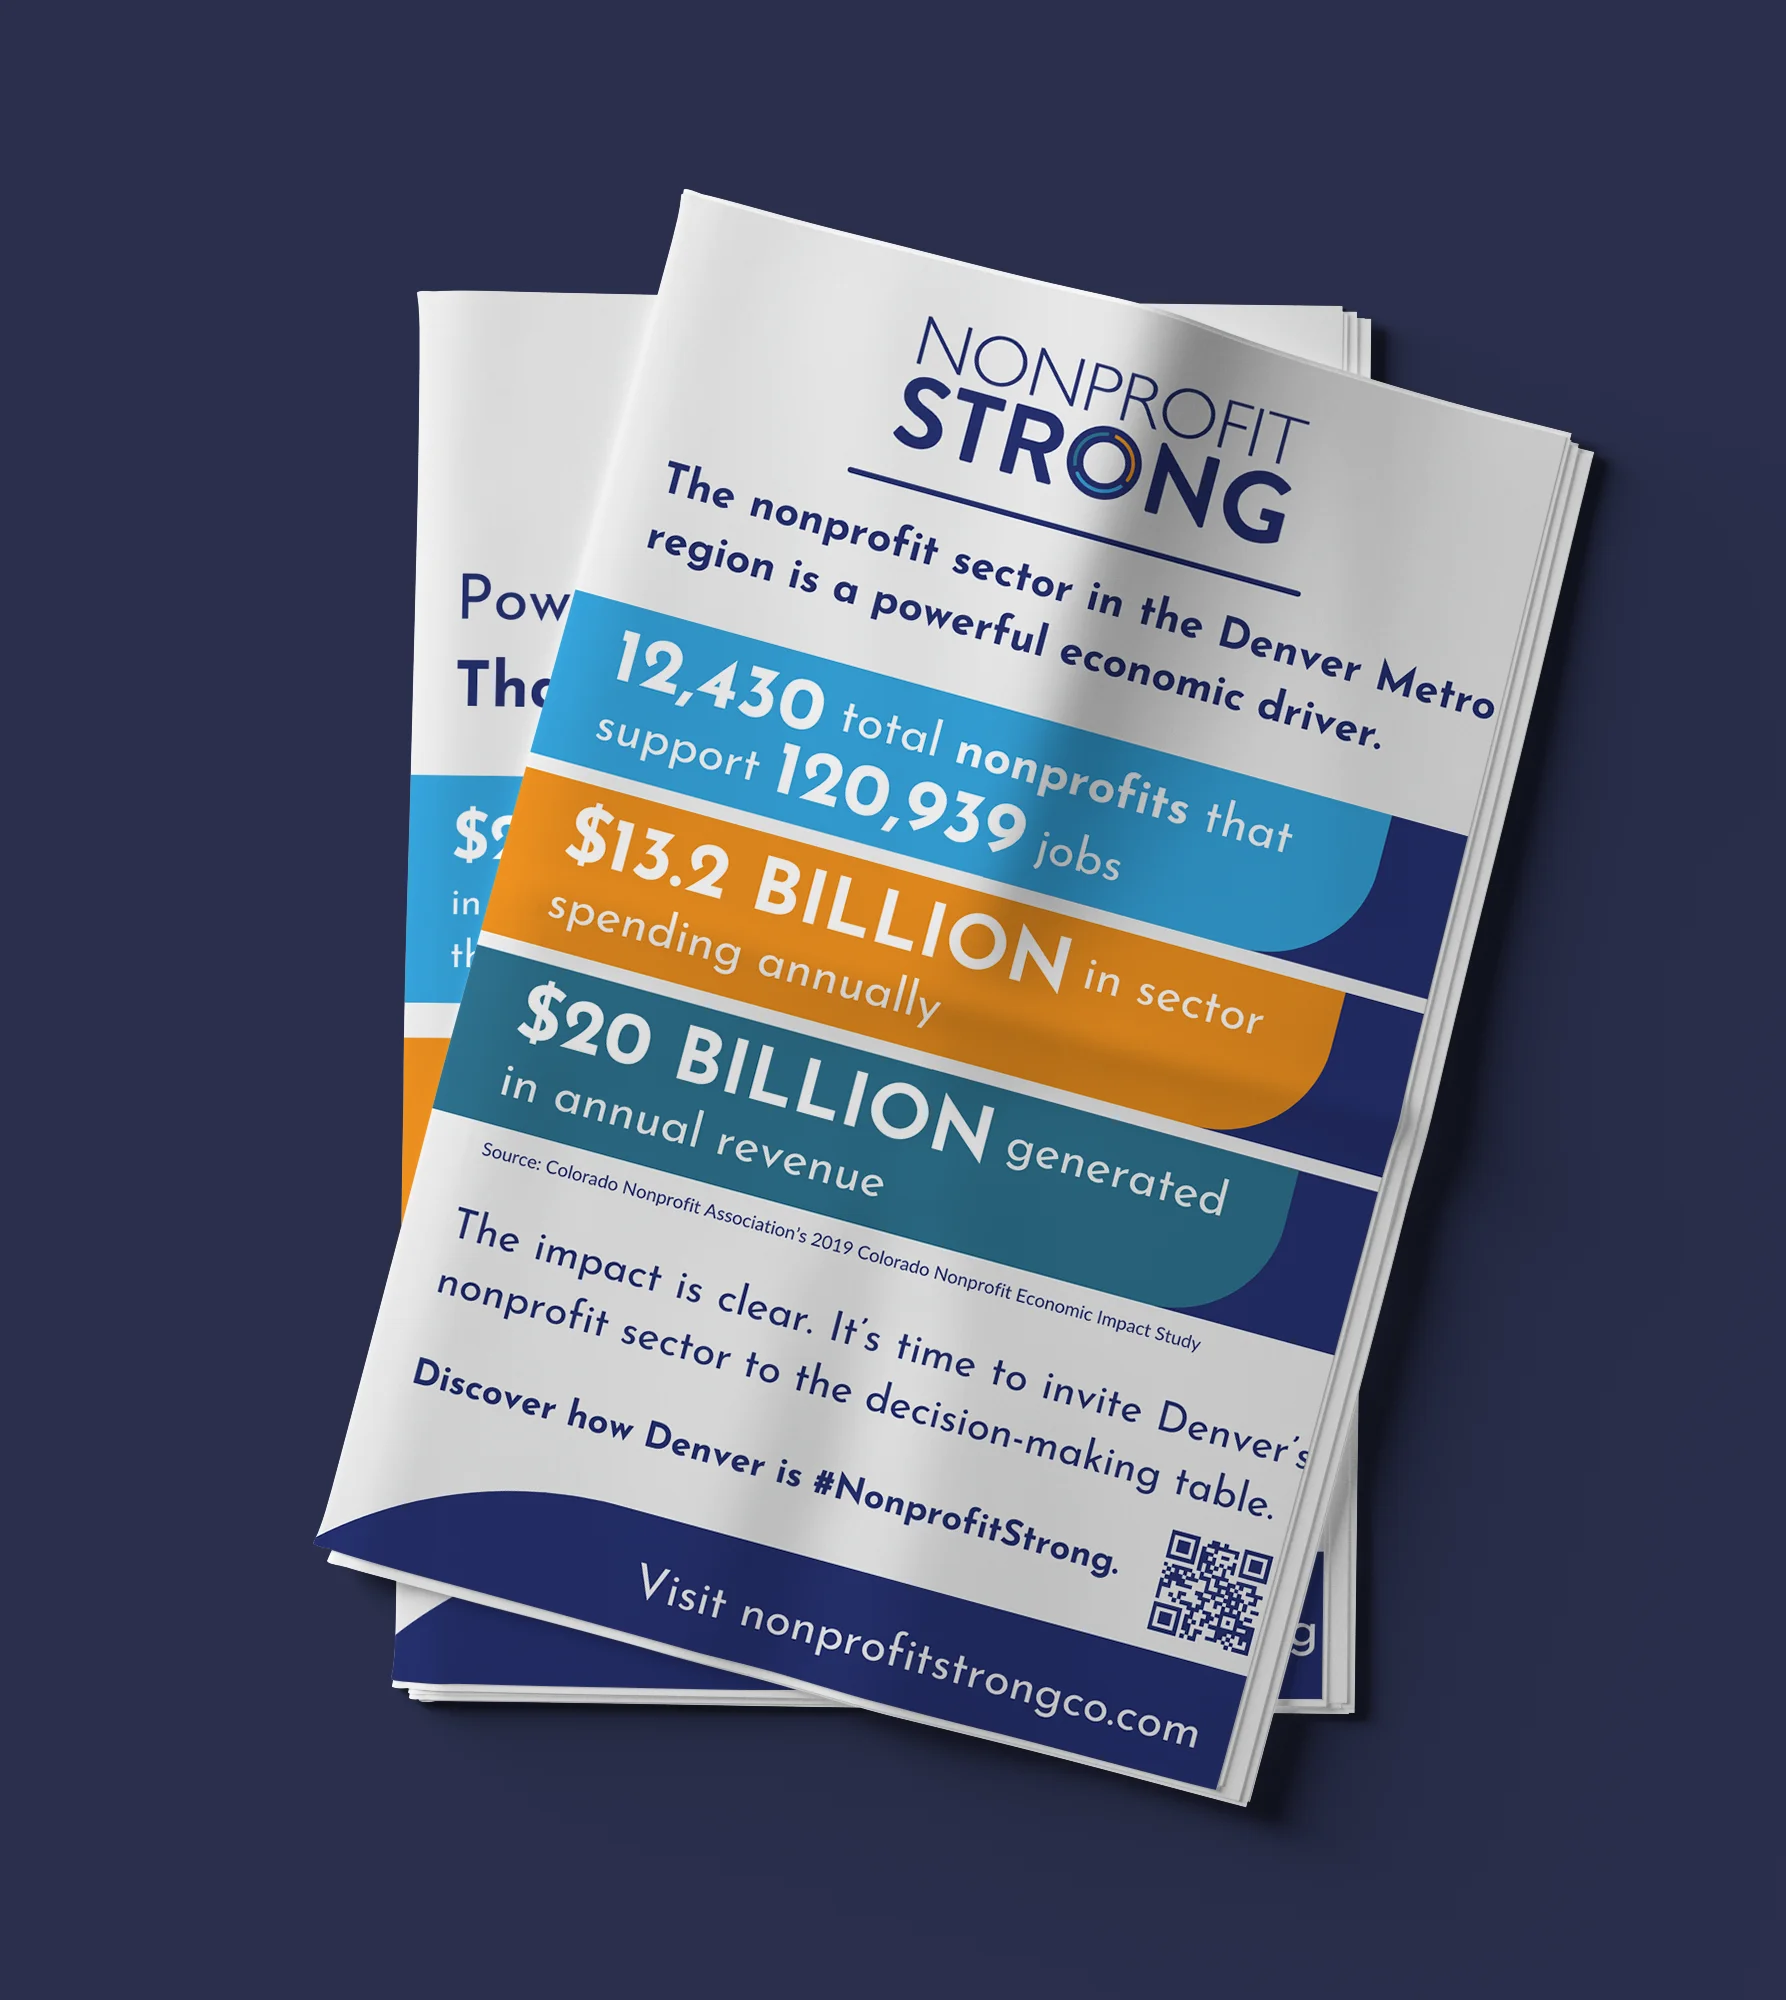 Mockup of Nonprofit Strong newspaper ad